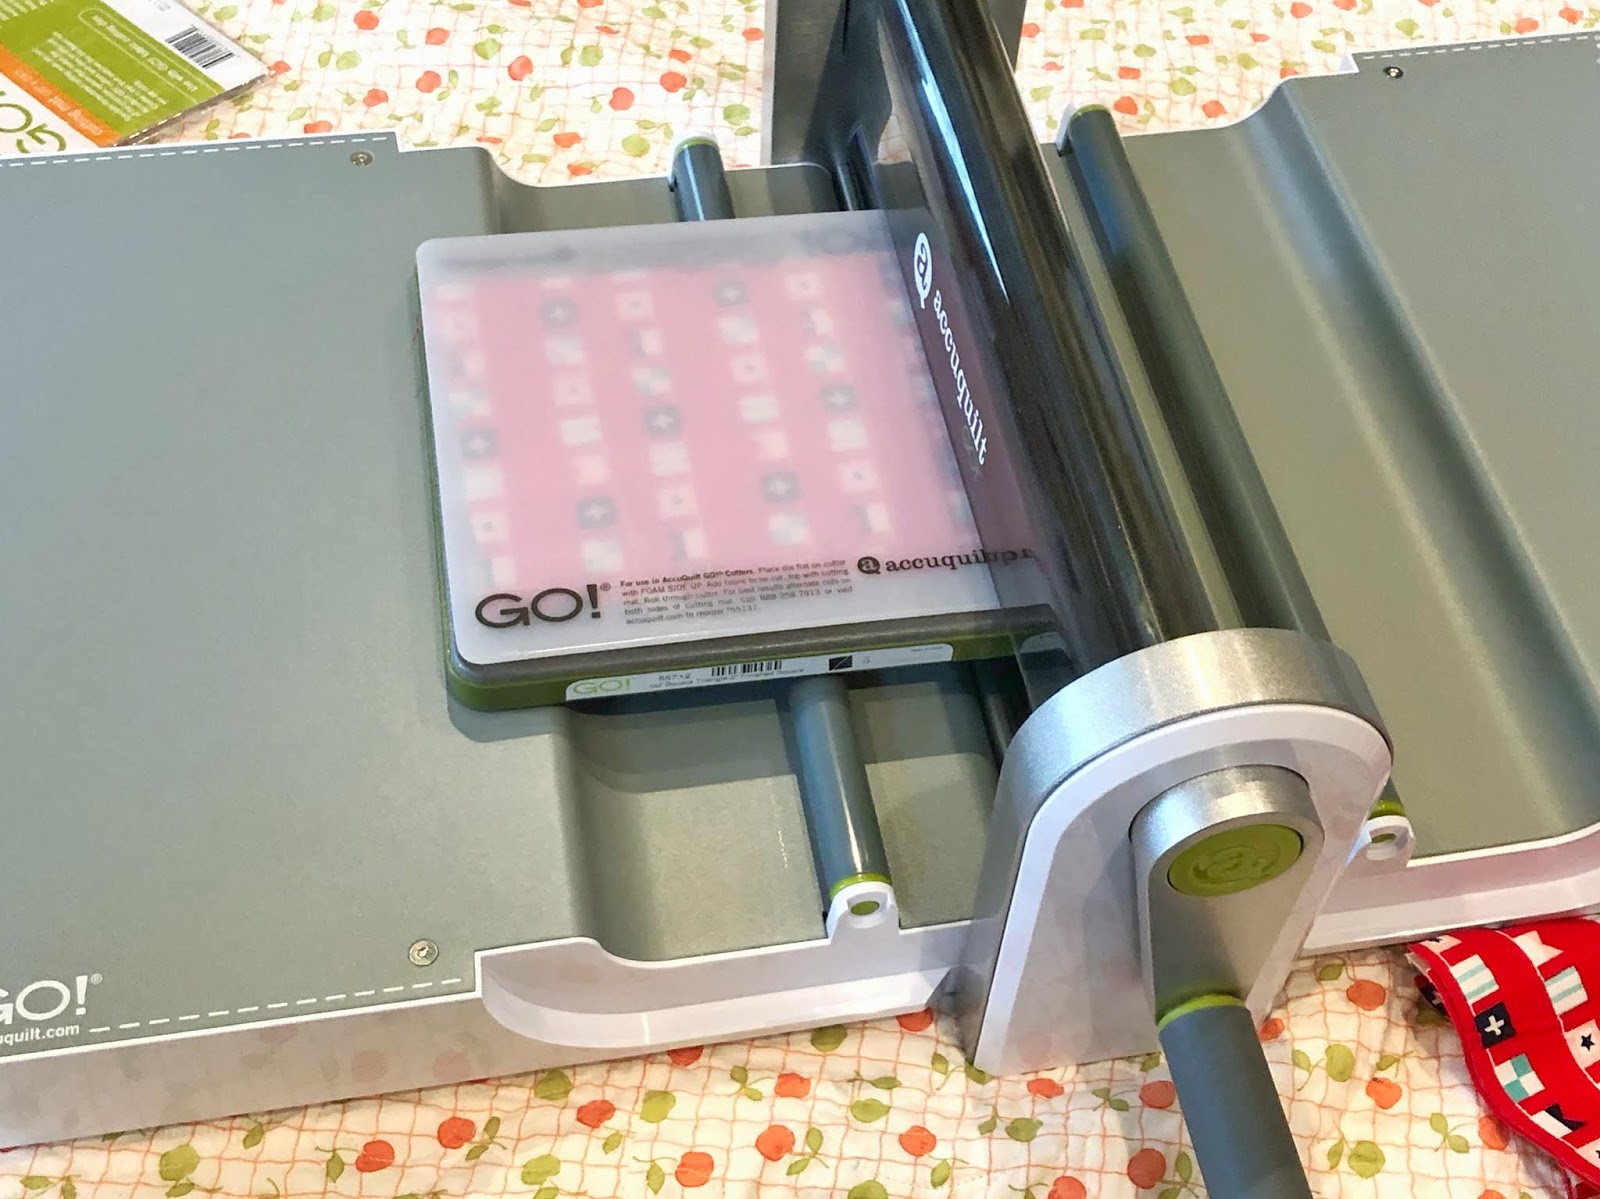 Product Review: Accuquilt Ready.Set.Go! Ultimate Fabric Cutting System